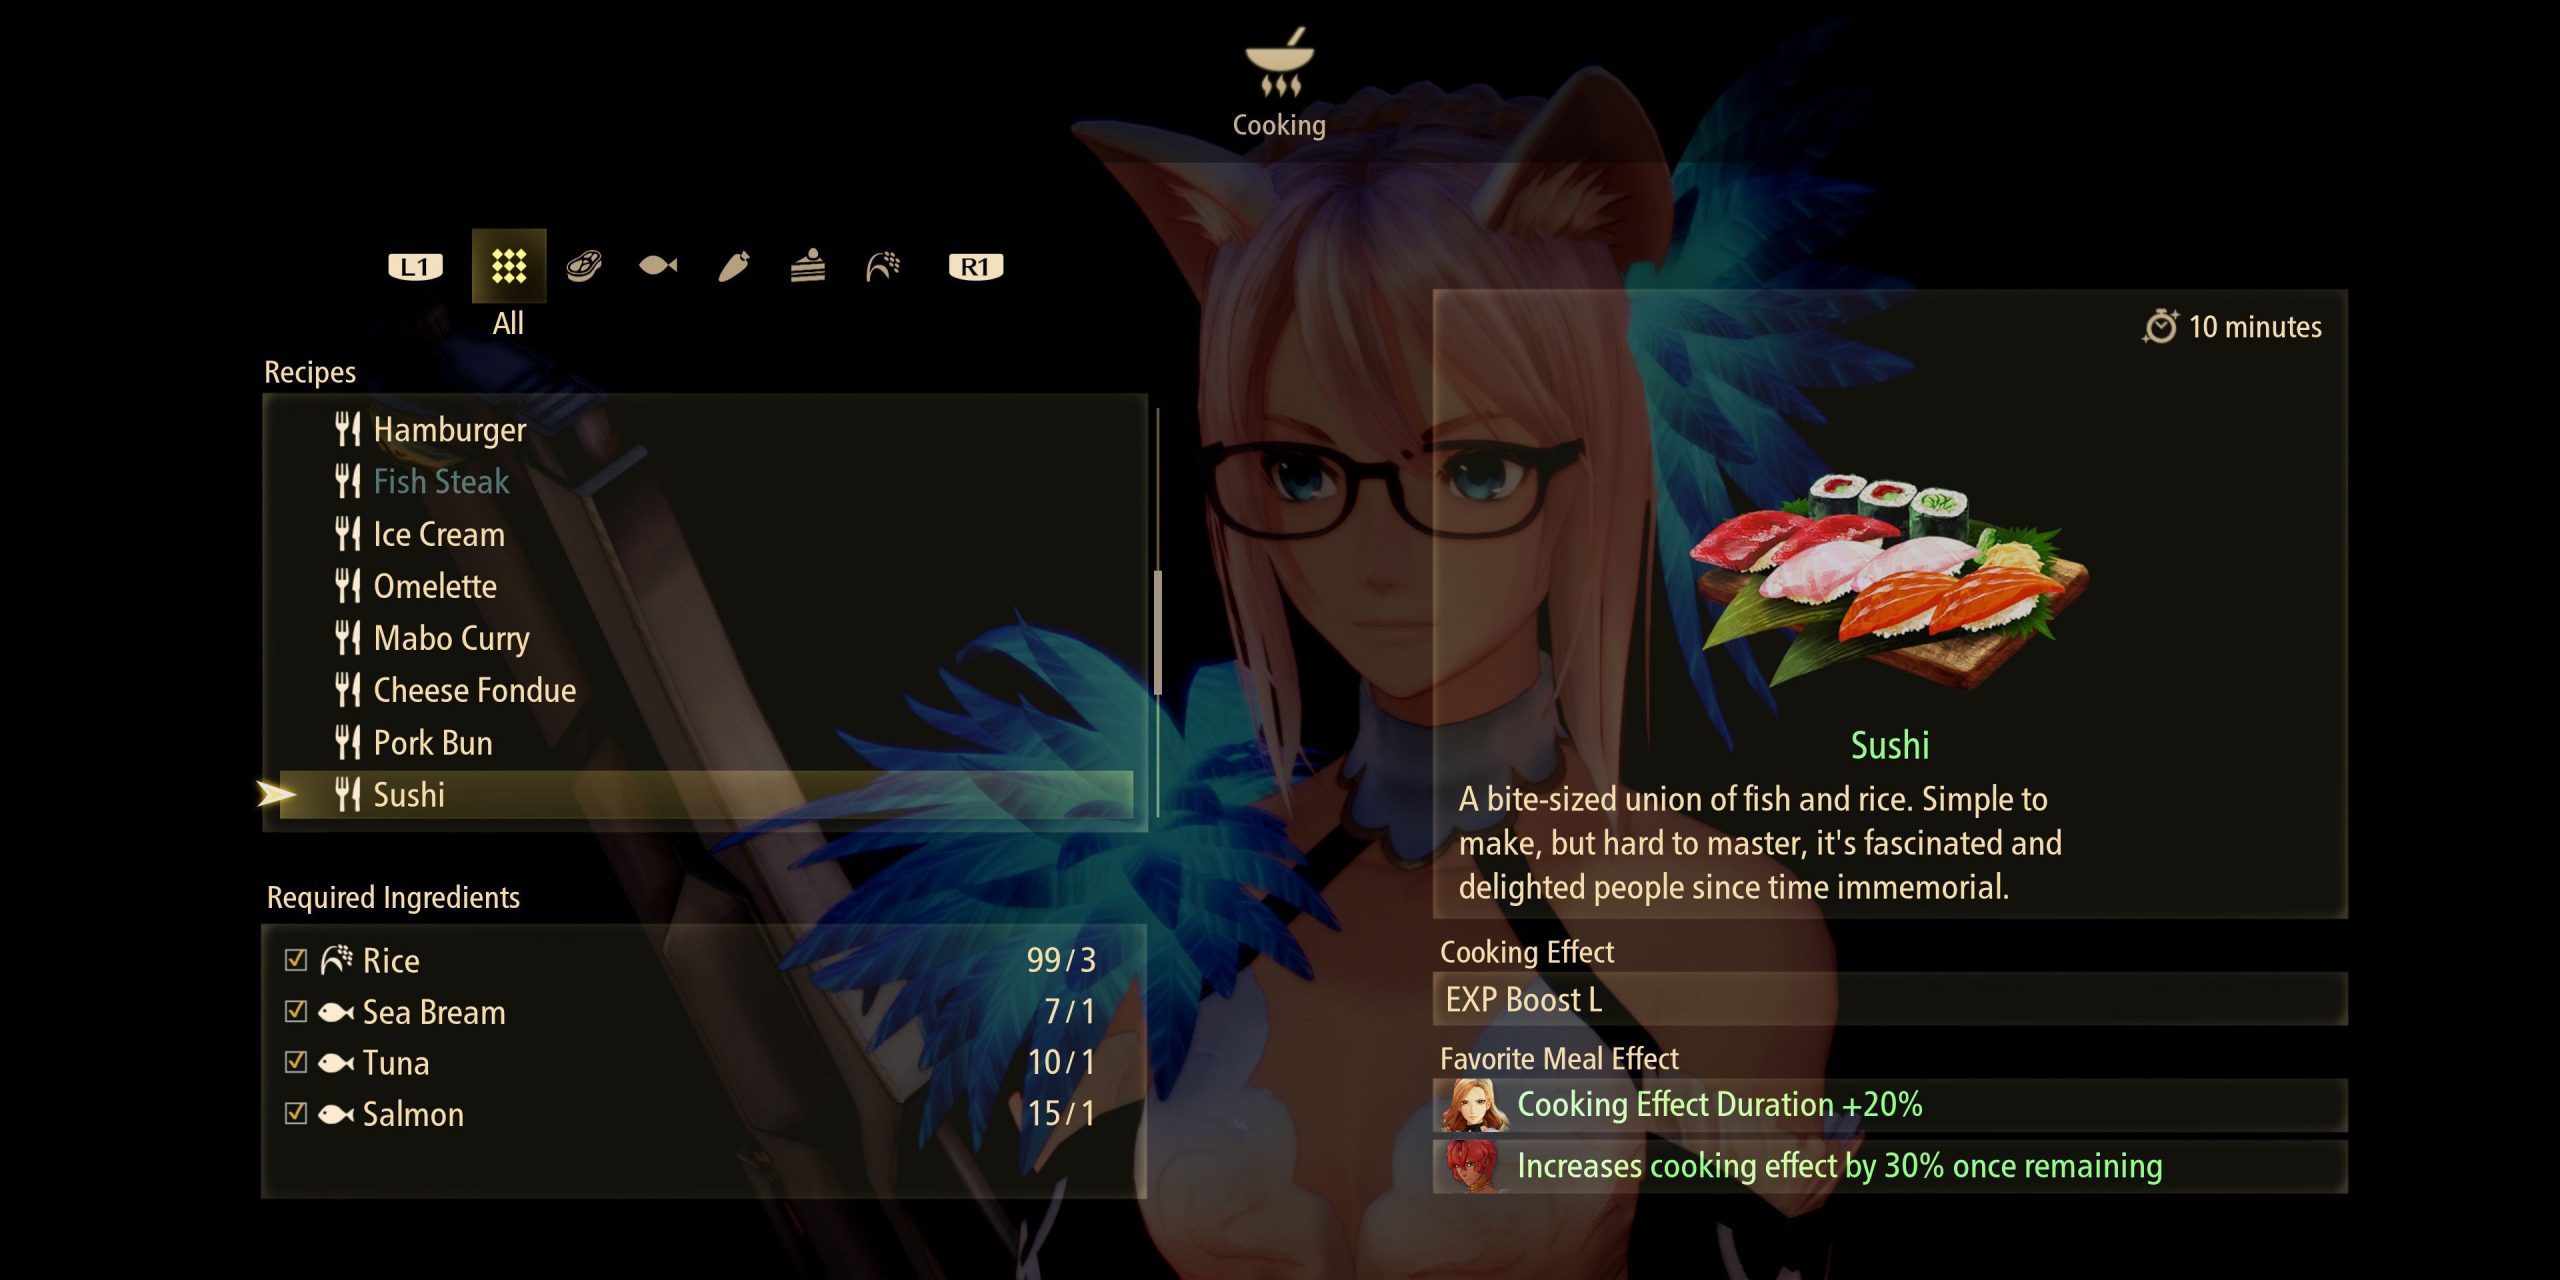 tales-of-arise-cooking-recipes-25-sushi-8844936